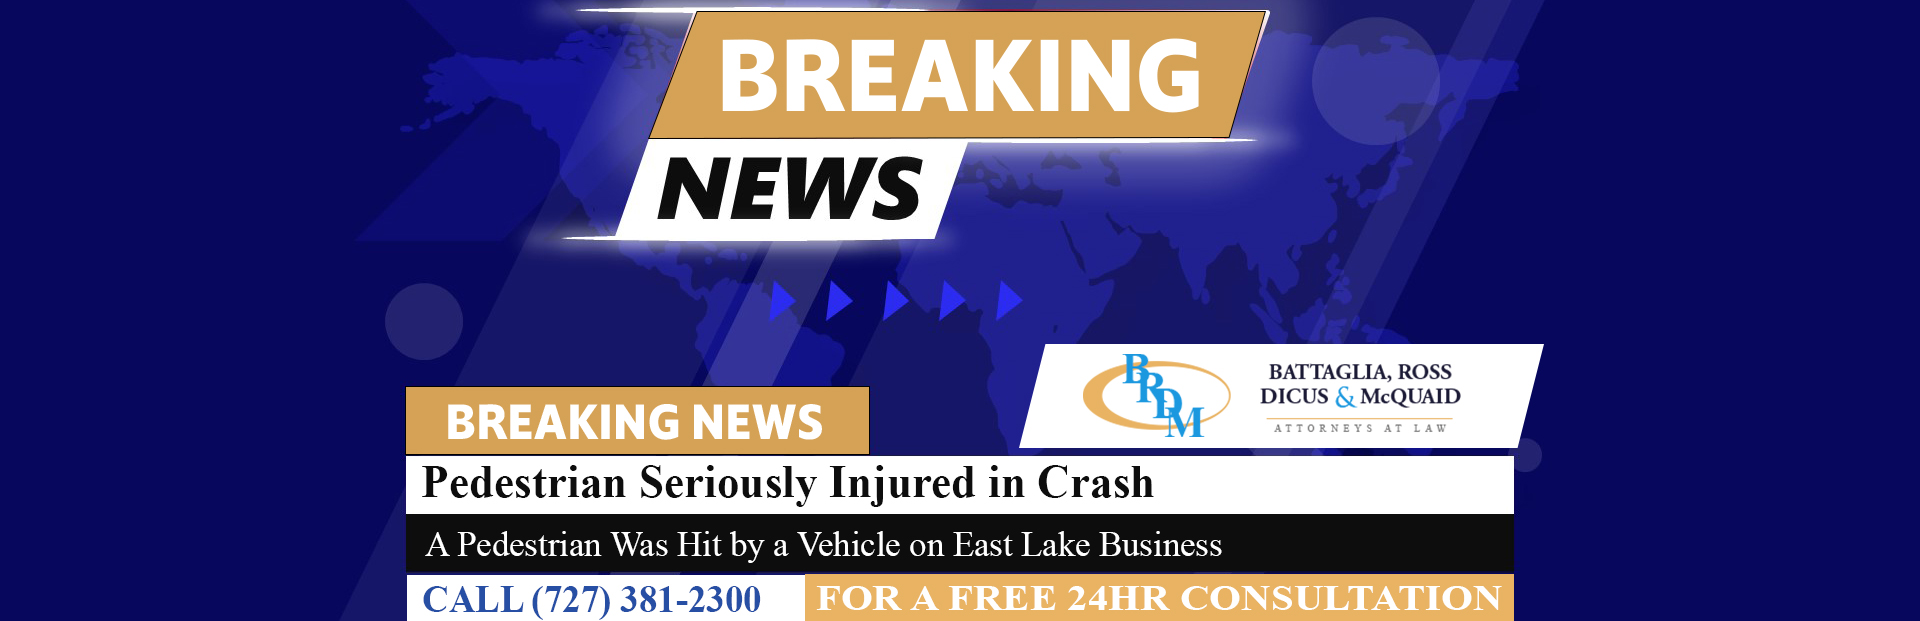 [04-21-23] Pedestrian Seriously Injured in Crash on East Lake Business Roadway